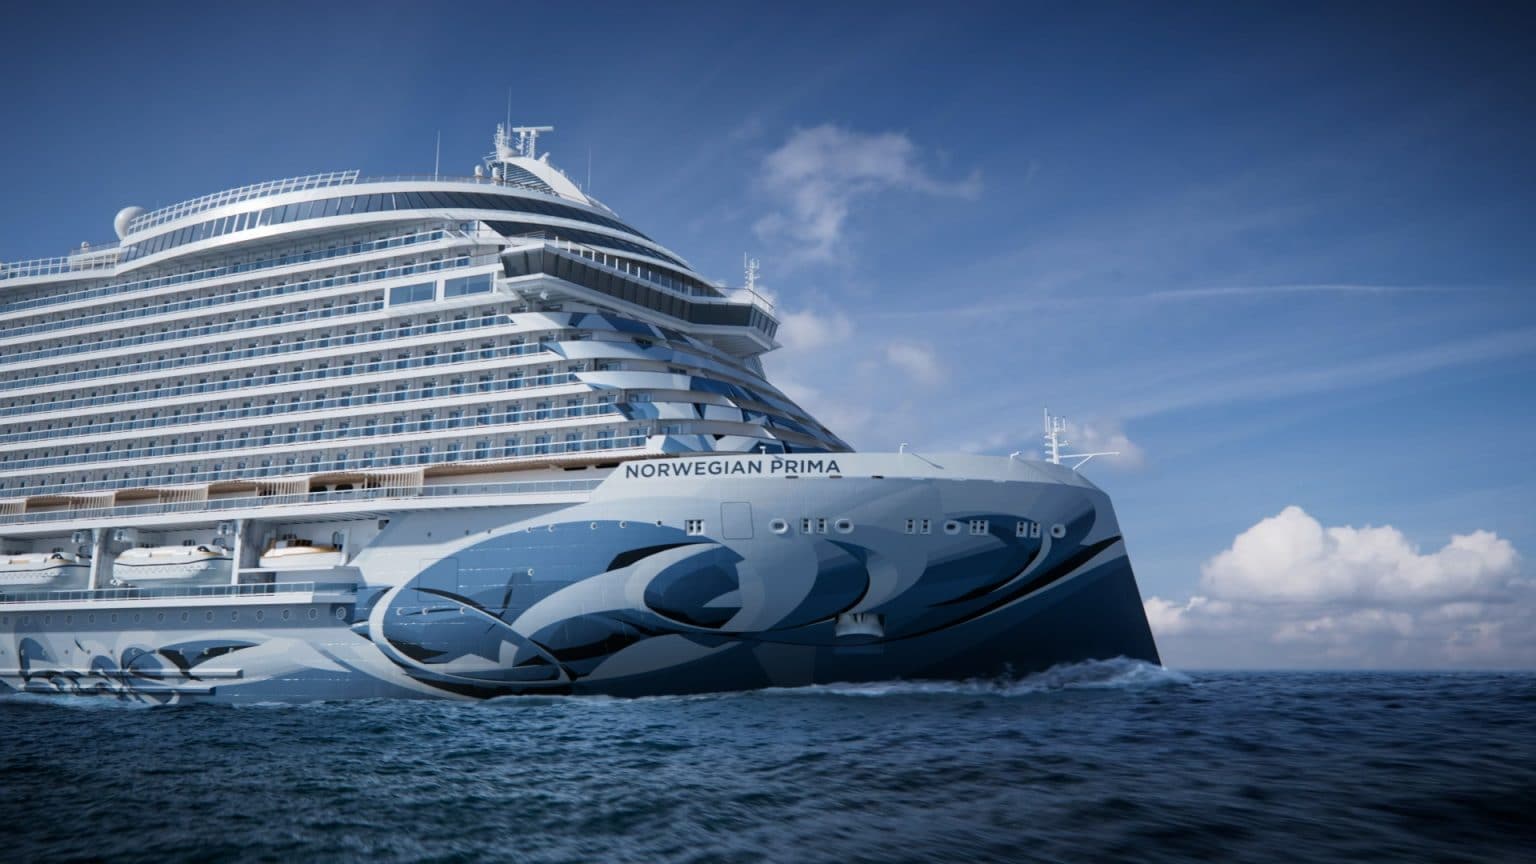 Compare New Cruise Ships 2024 With Other Options nessy rebecca